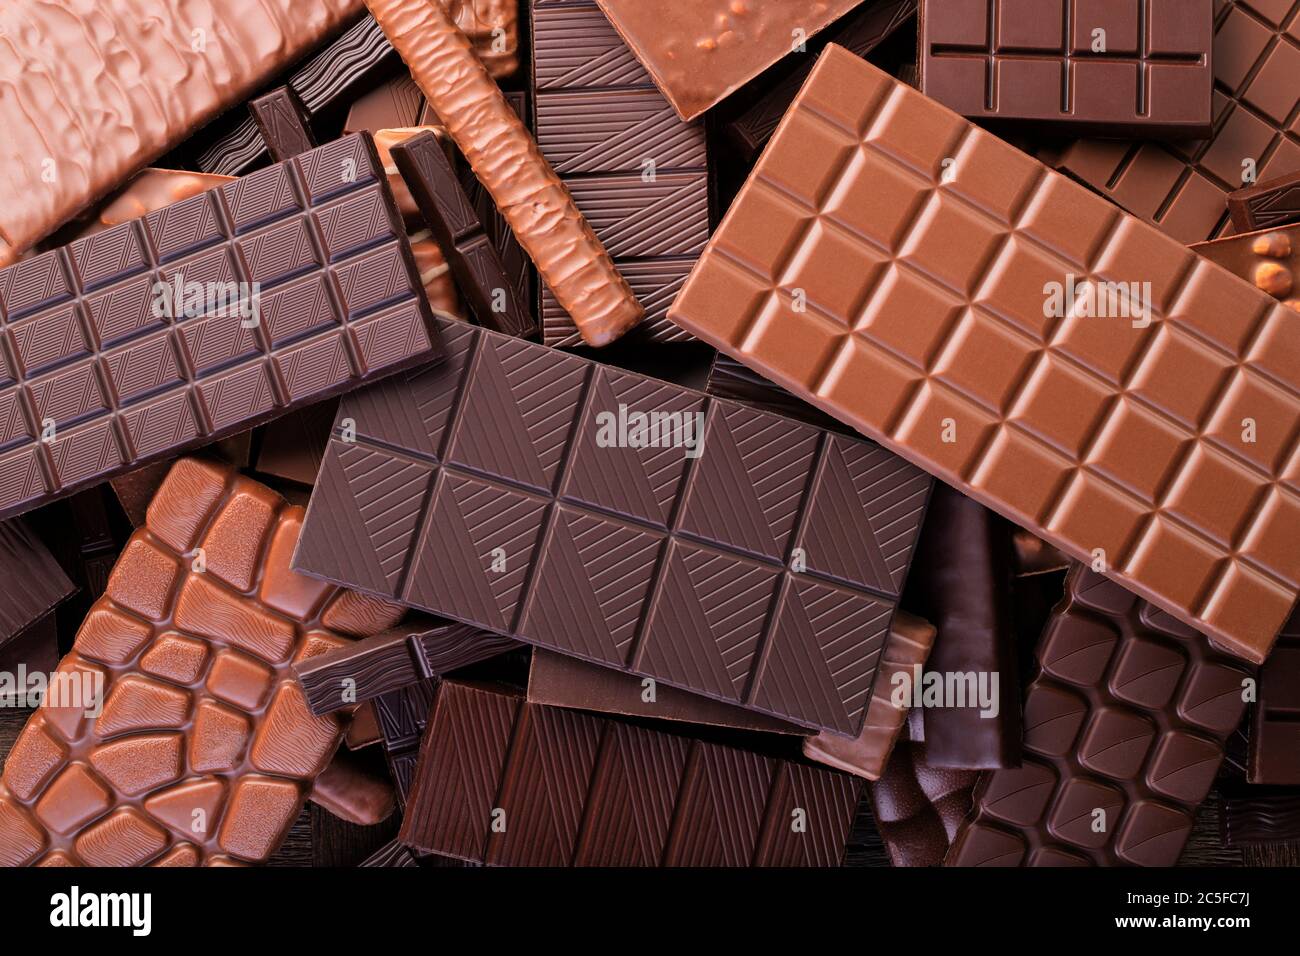 mix chocolate bars, top view. dessert food background Stock Photo